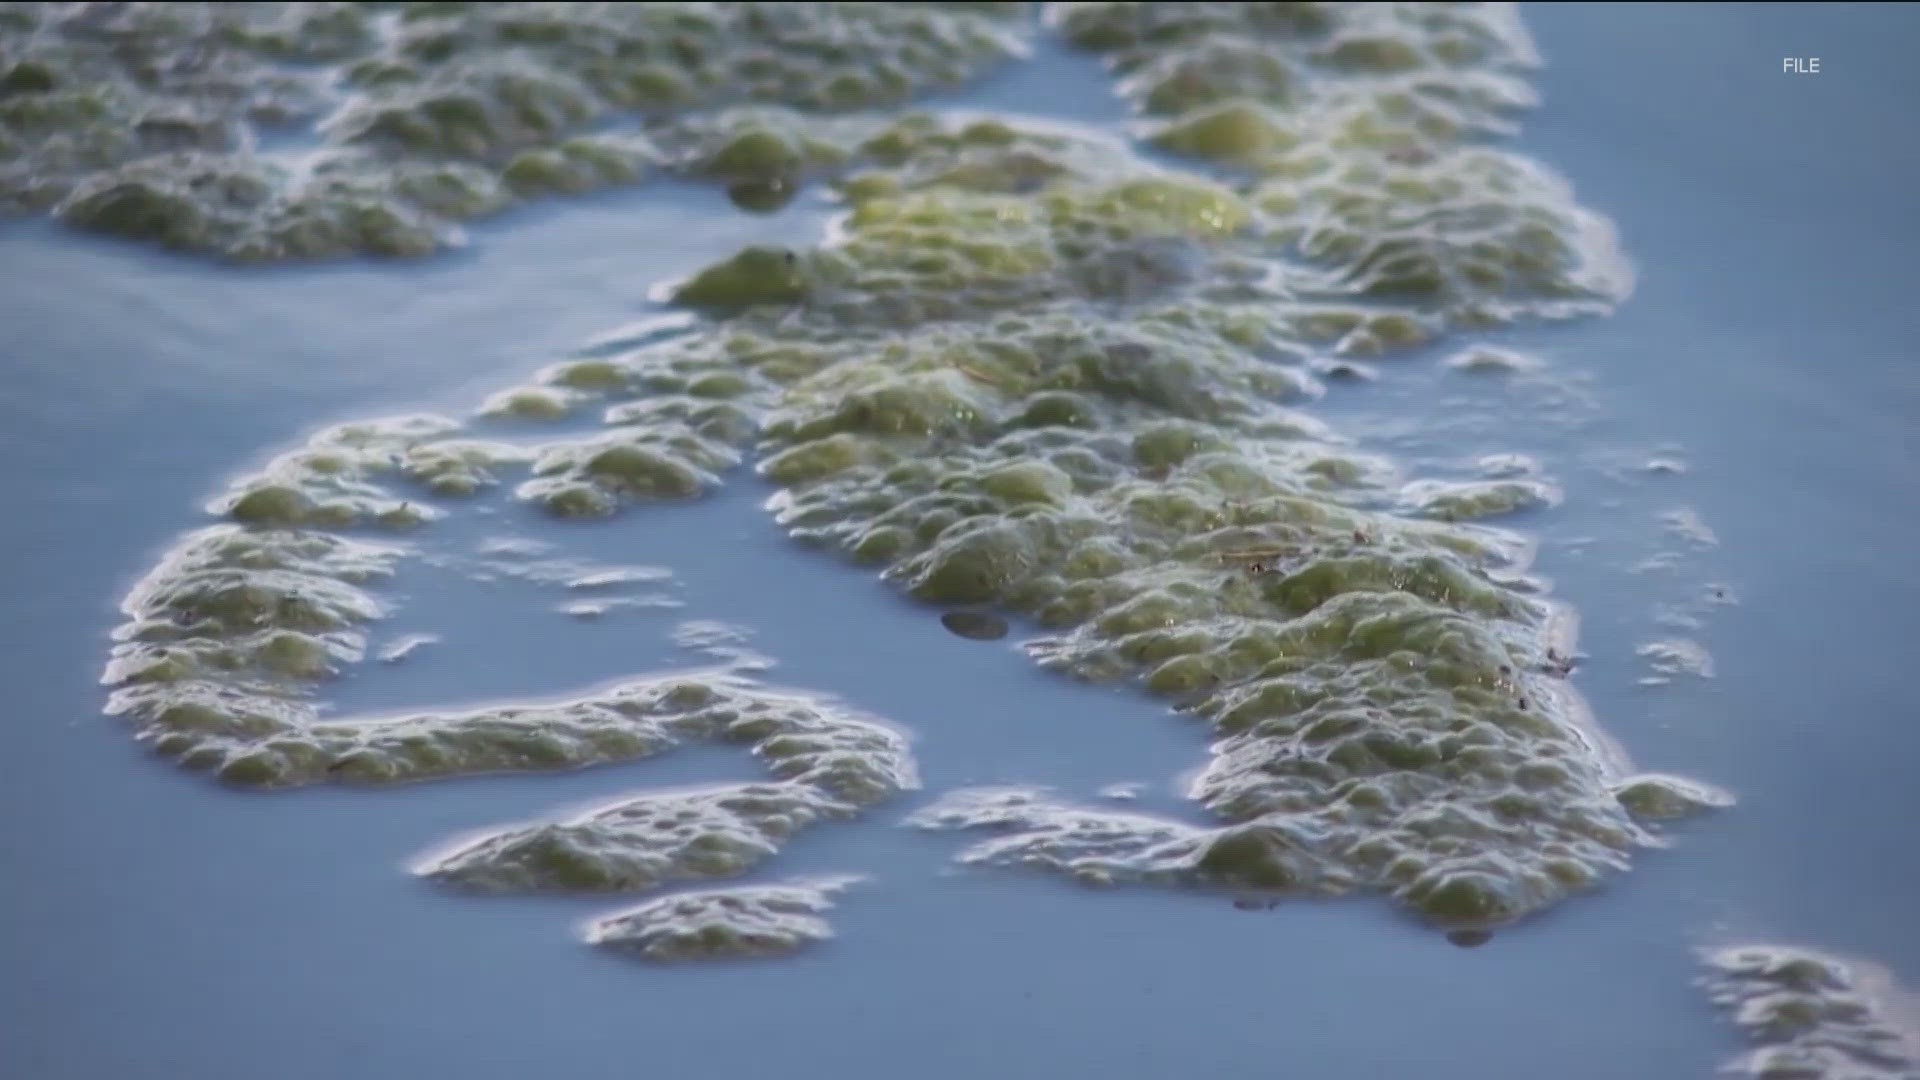 Environmental scientists in Austin are looking at ways to mitigate the spread of toxic algae.